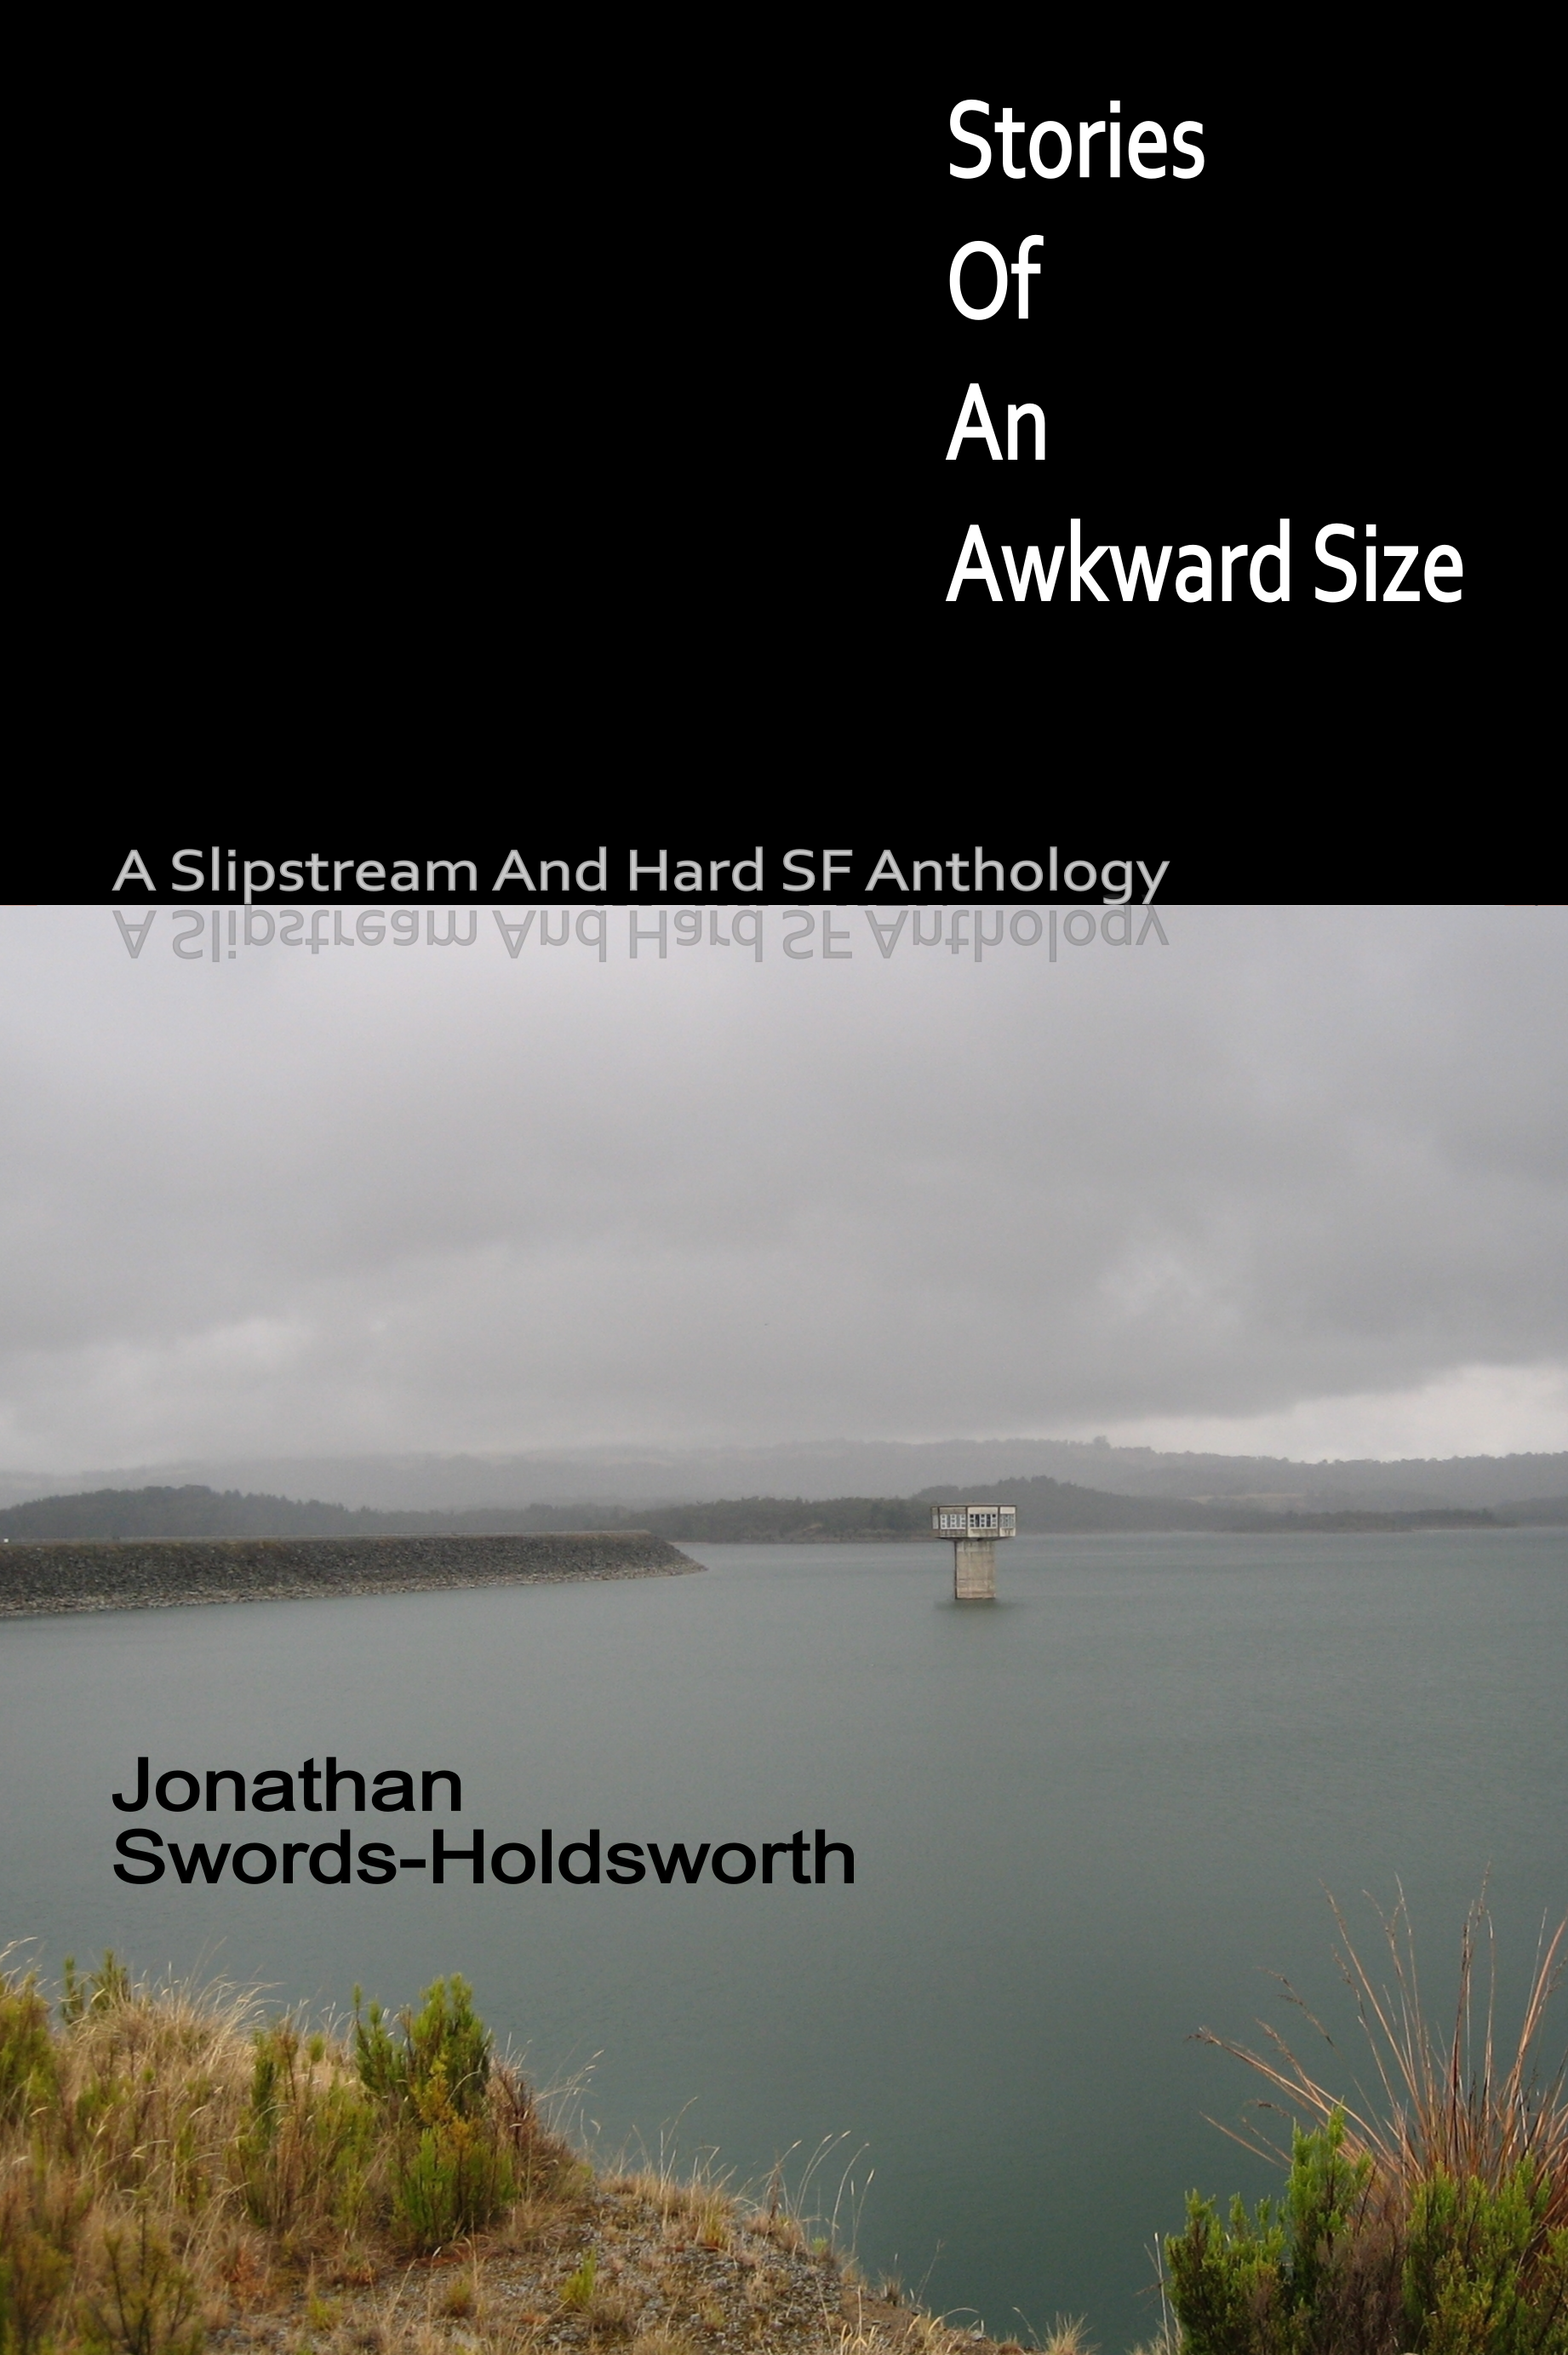 Stories Of An Awkward Size - A Slipstream And Hard SF Anthology